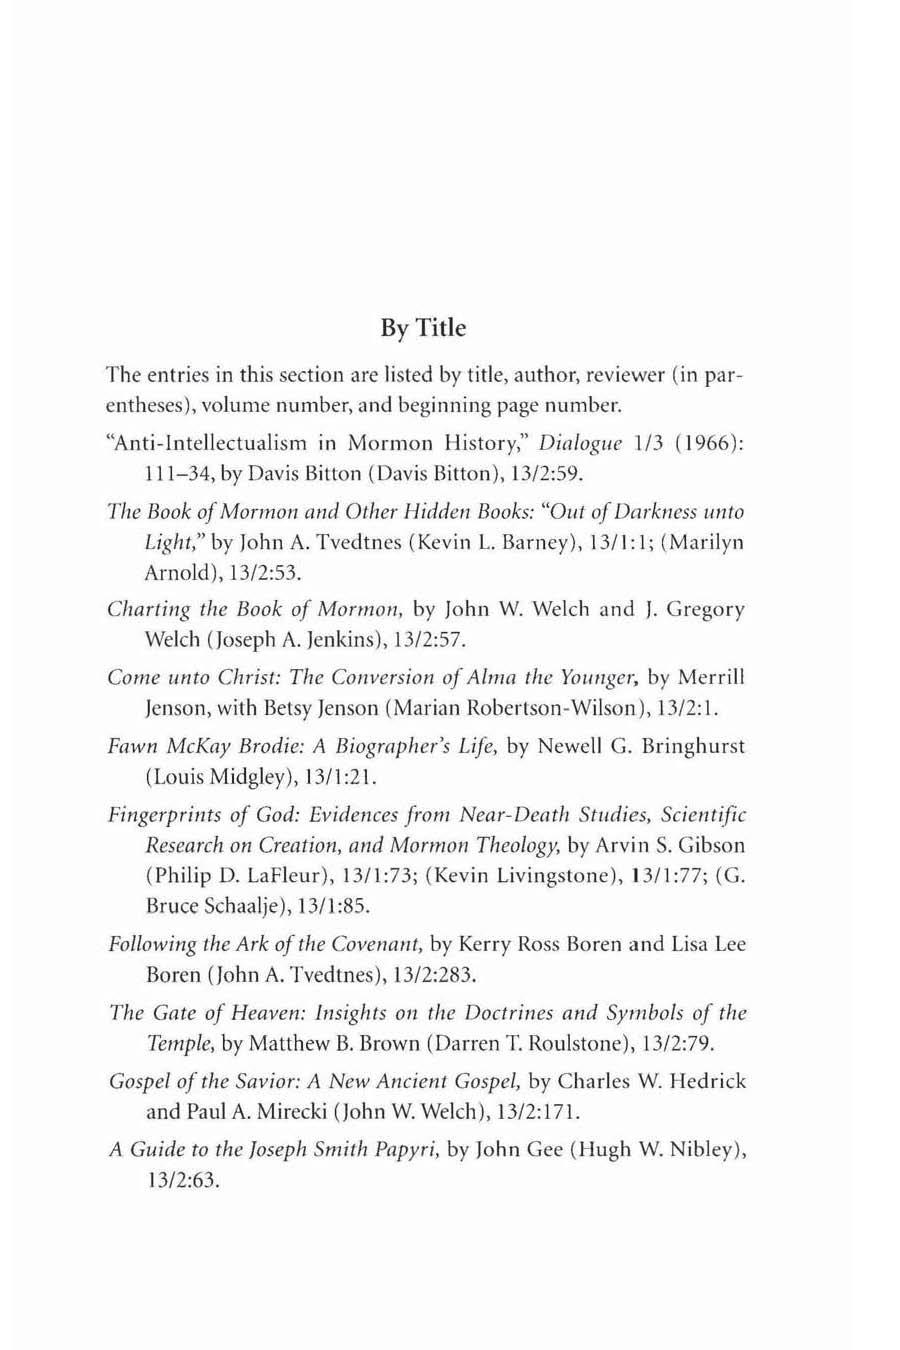 By Title The entries in this section arc listed by ti tle, author. reviewer (in parentheses), volume number, and beginning page number.